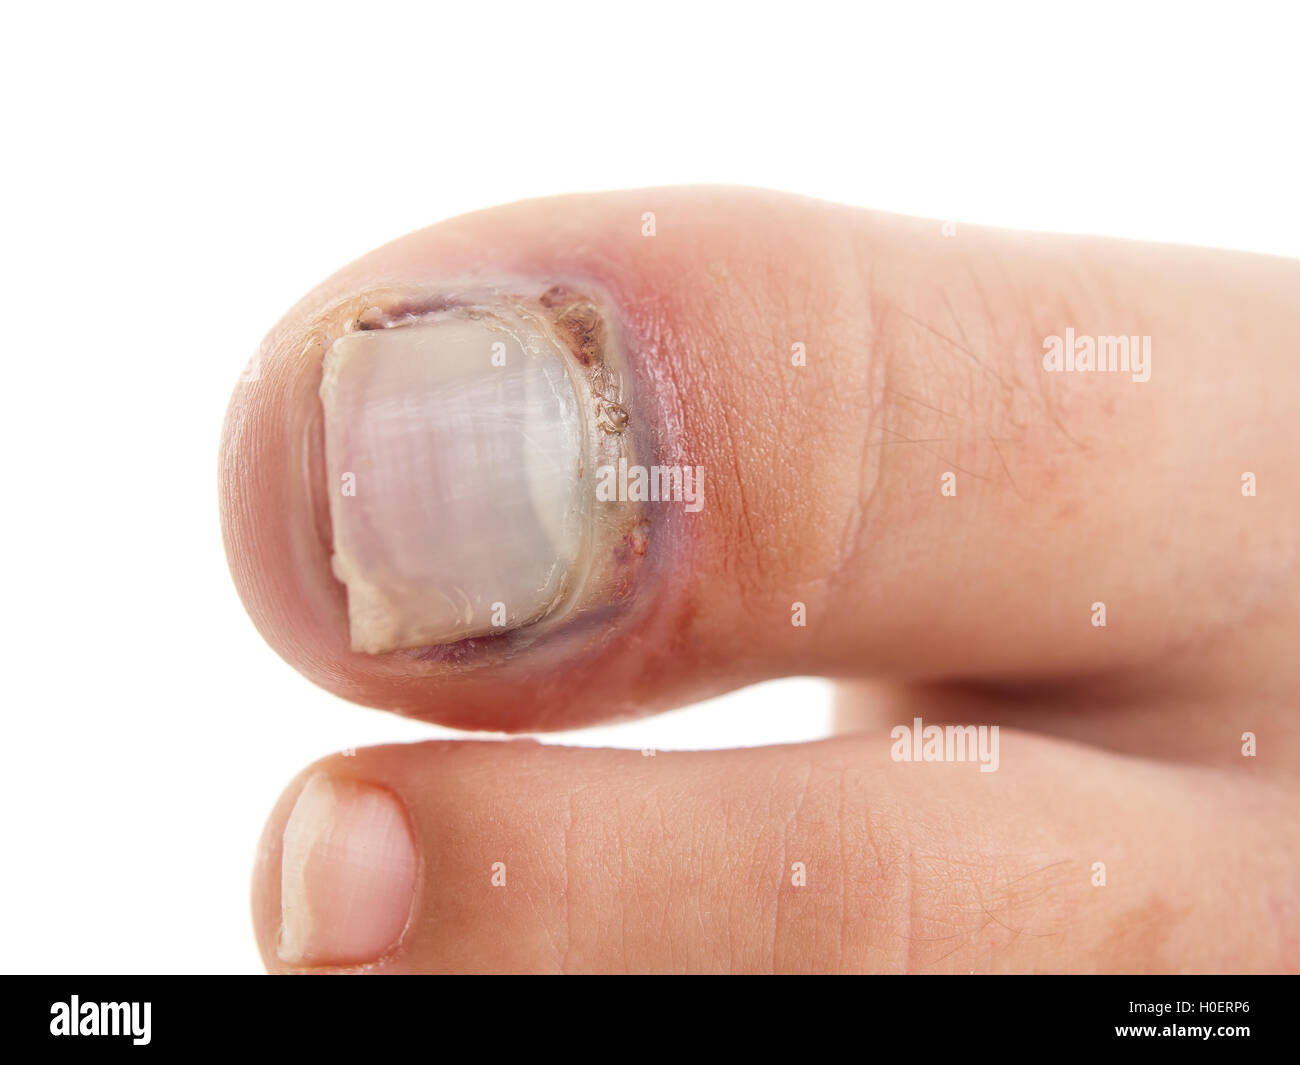 Broken big toe with nail detachment on pure white background Stock Photo